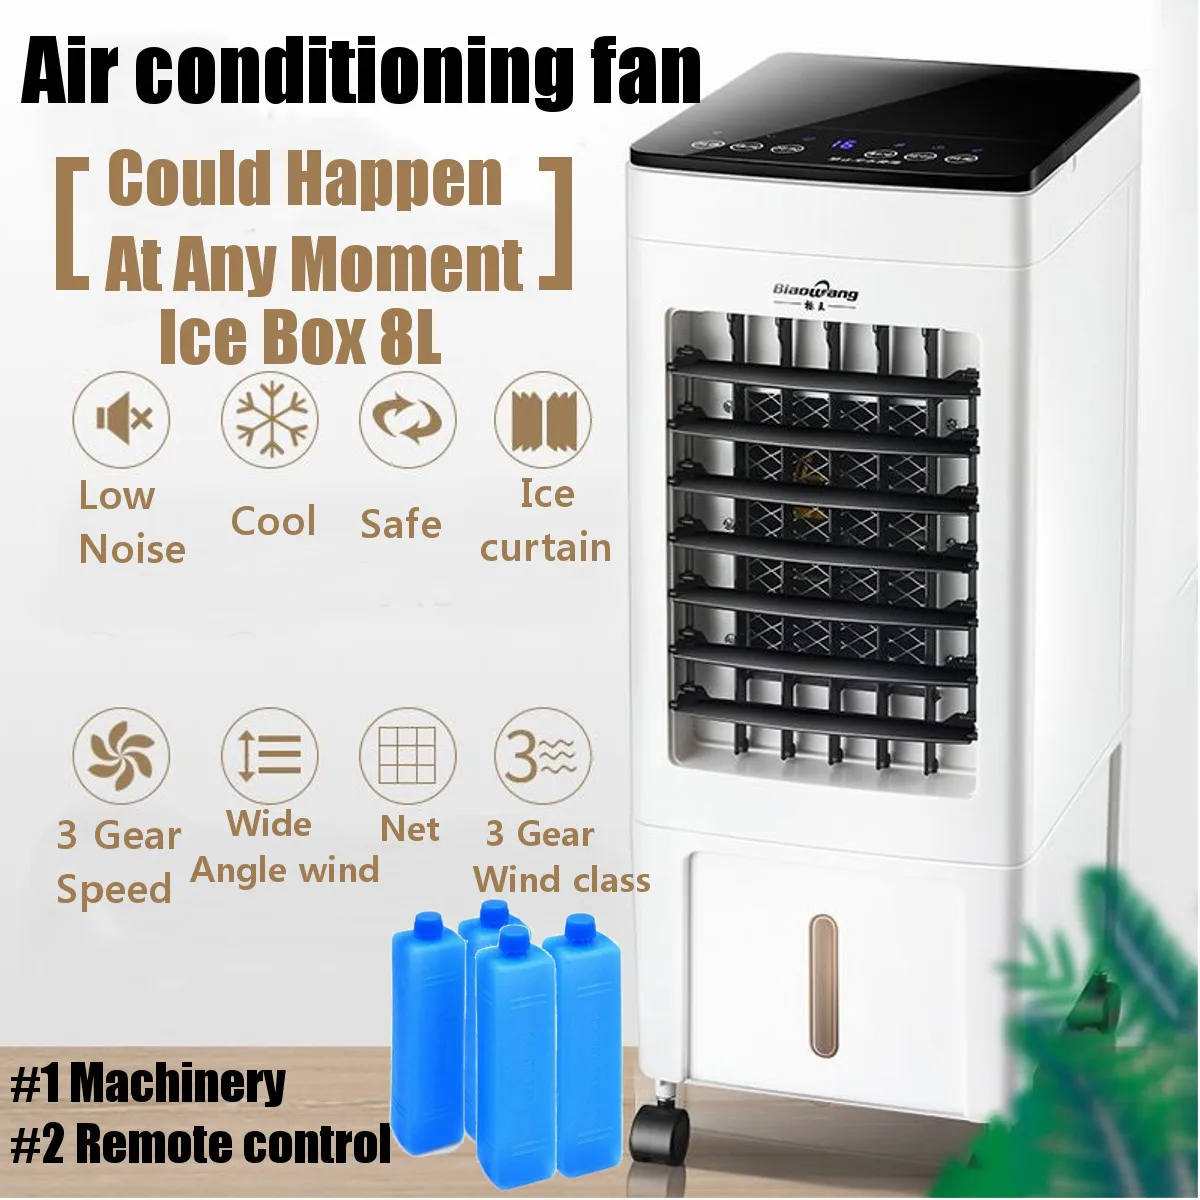 Blue GOTOTOP Air Conditioner Cooler Fan Humidify Knob Control with Ice Crystal Box & 4 Caster Wheels UK Plug 220V